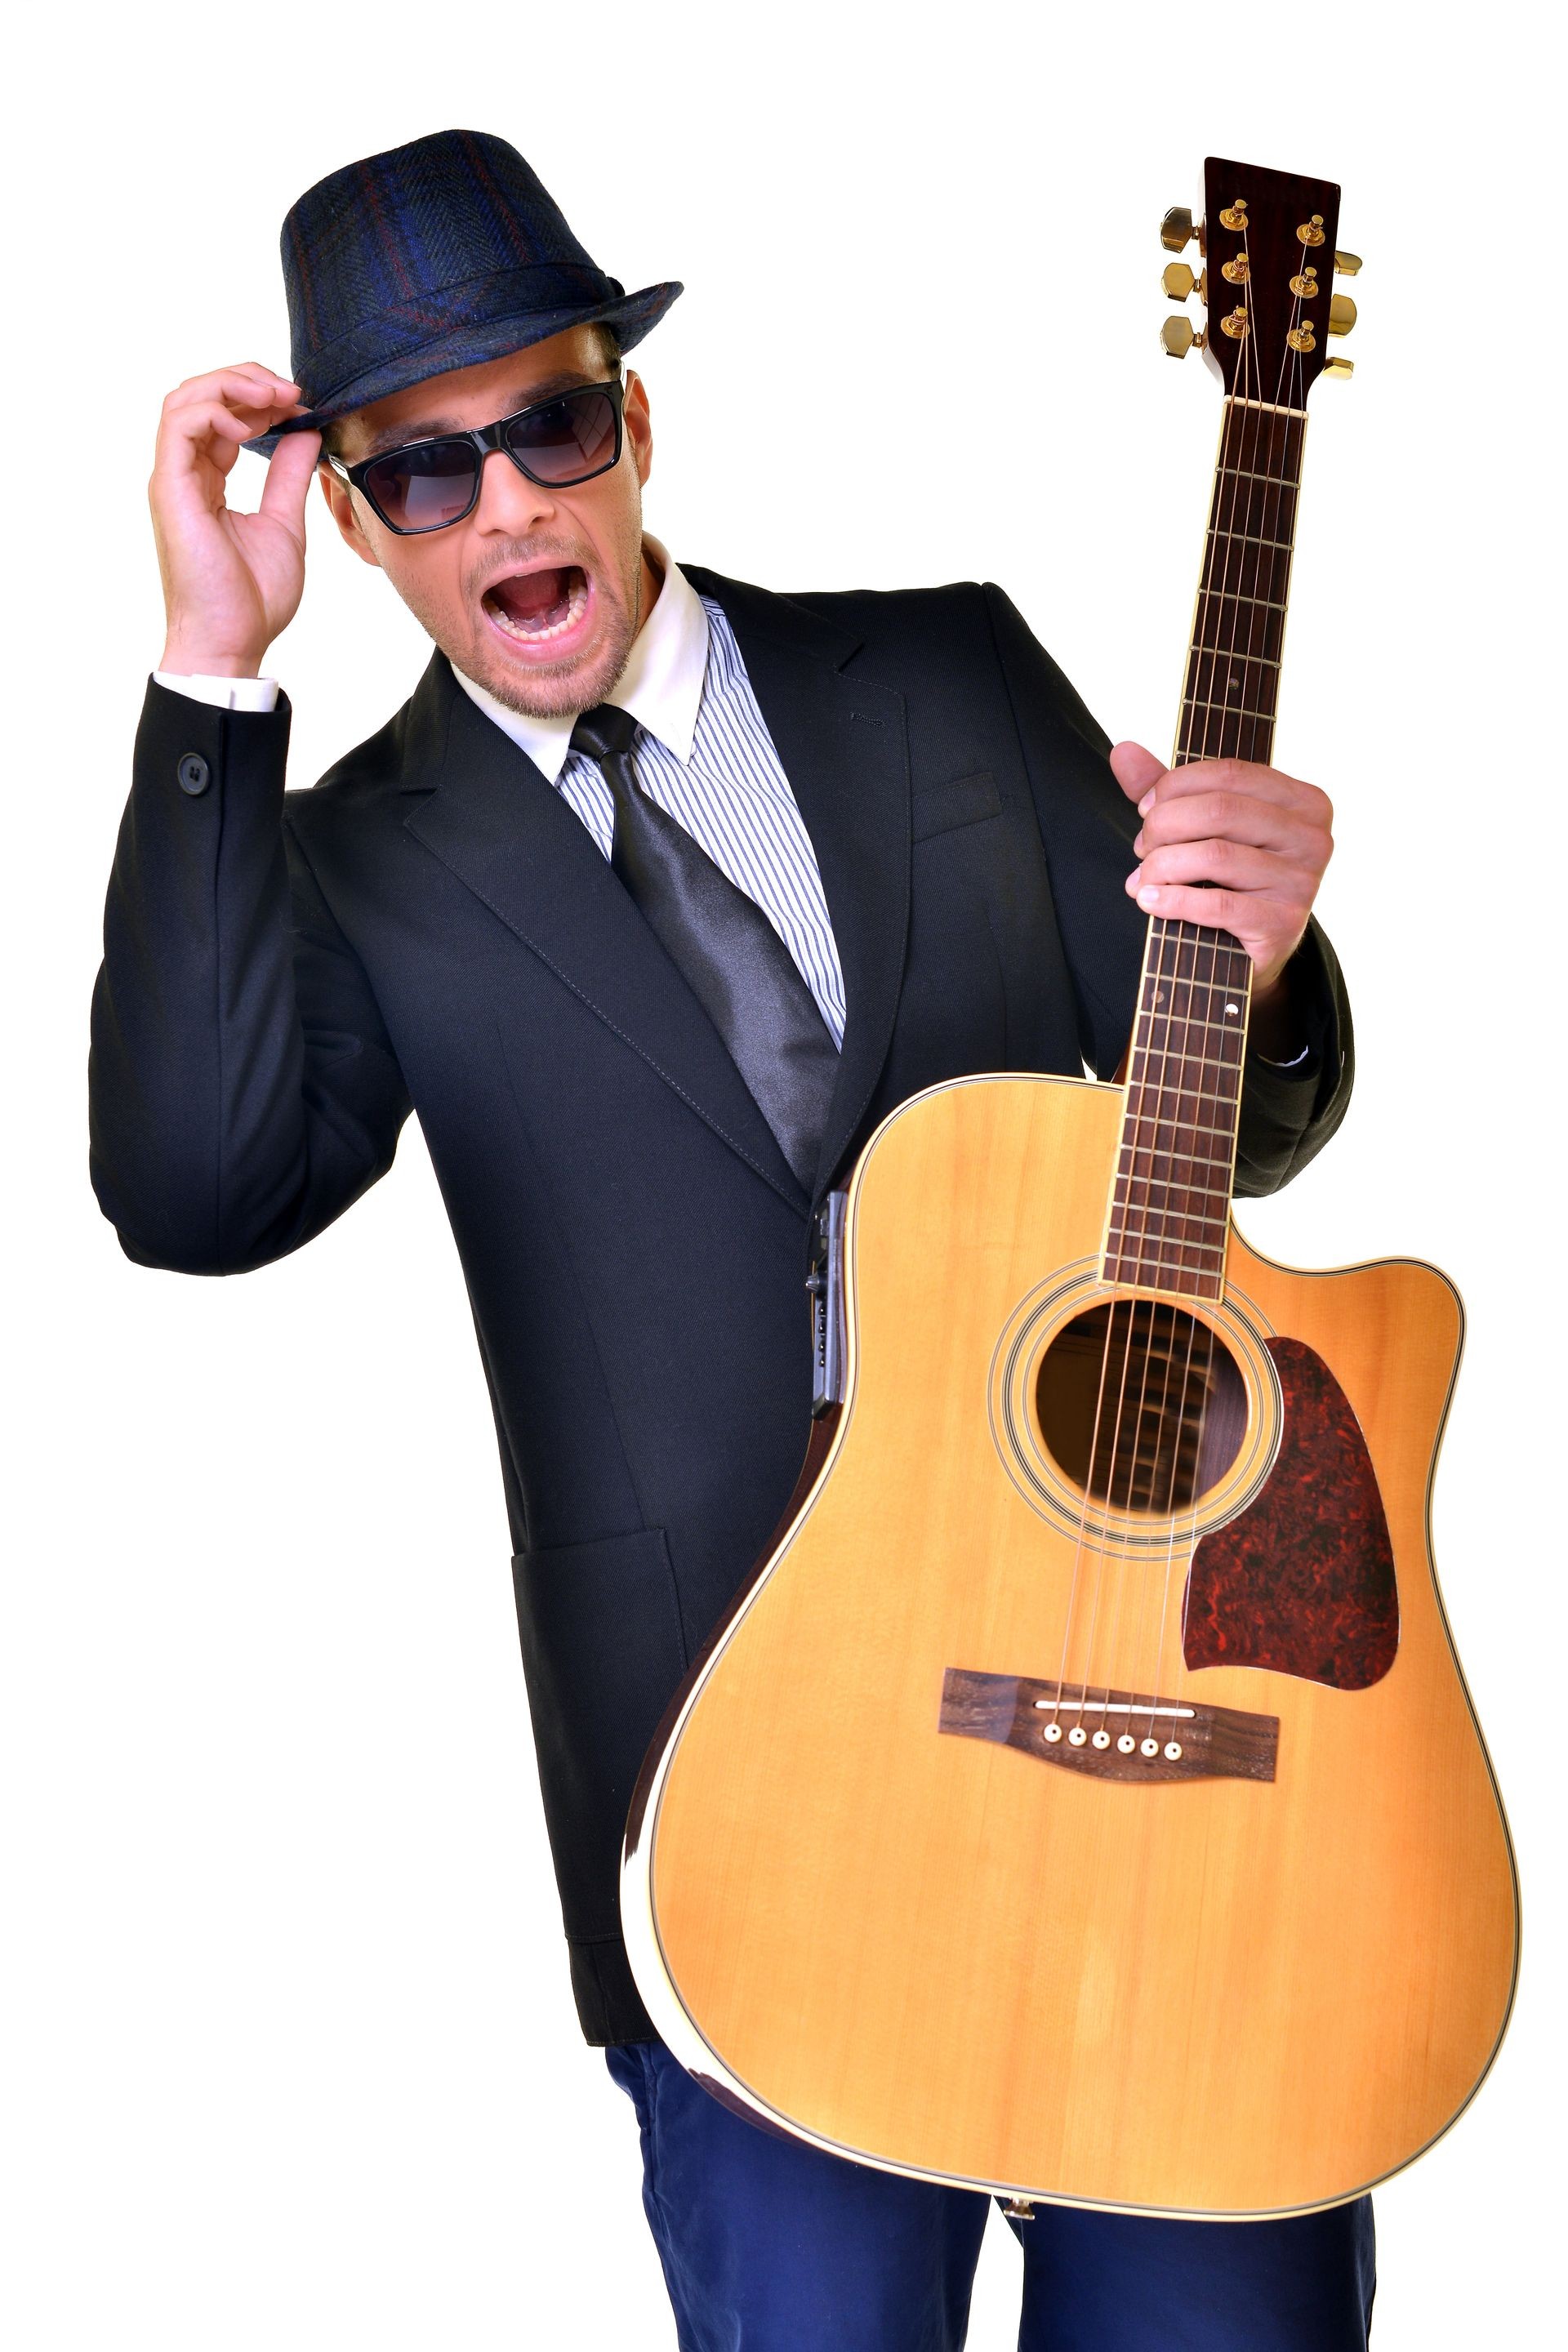  happy man with guitar over white background